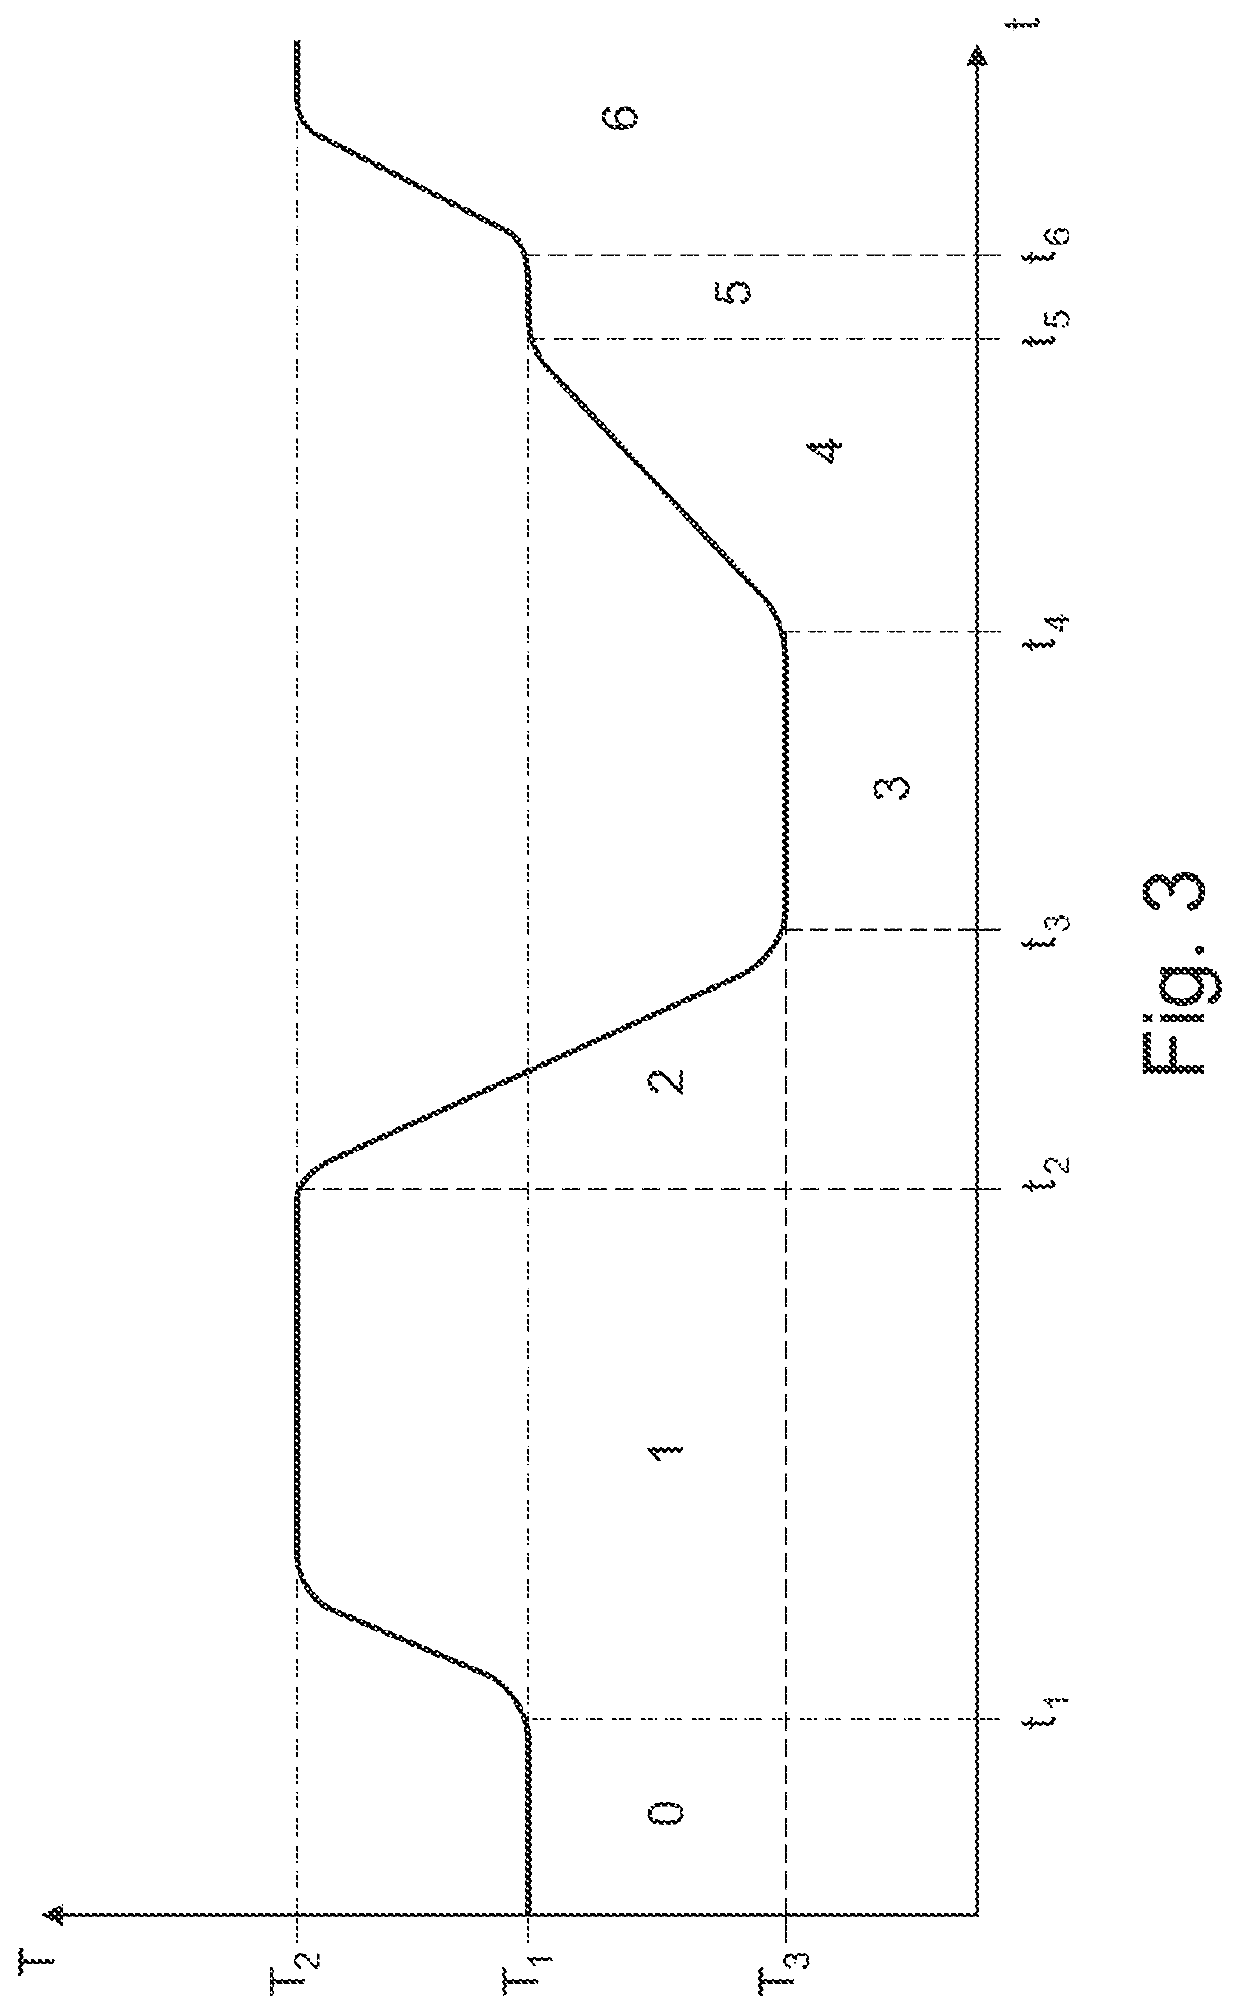 Storage device for storing a gas measuring device, storage device and gas detector system and method for storing the gas detector